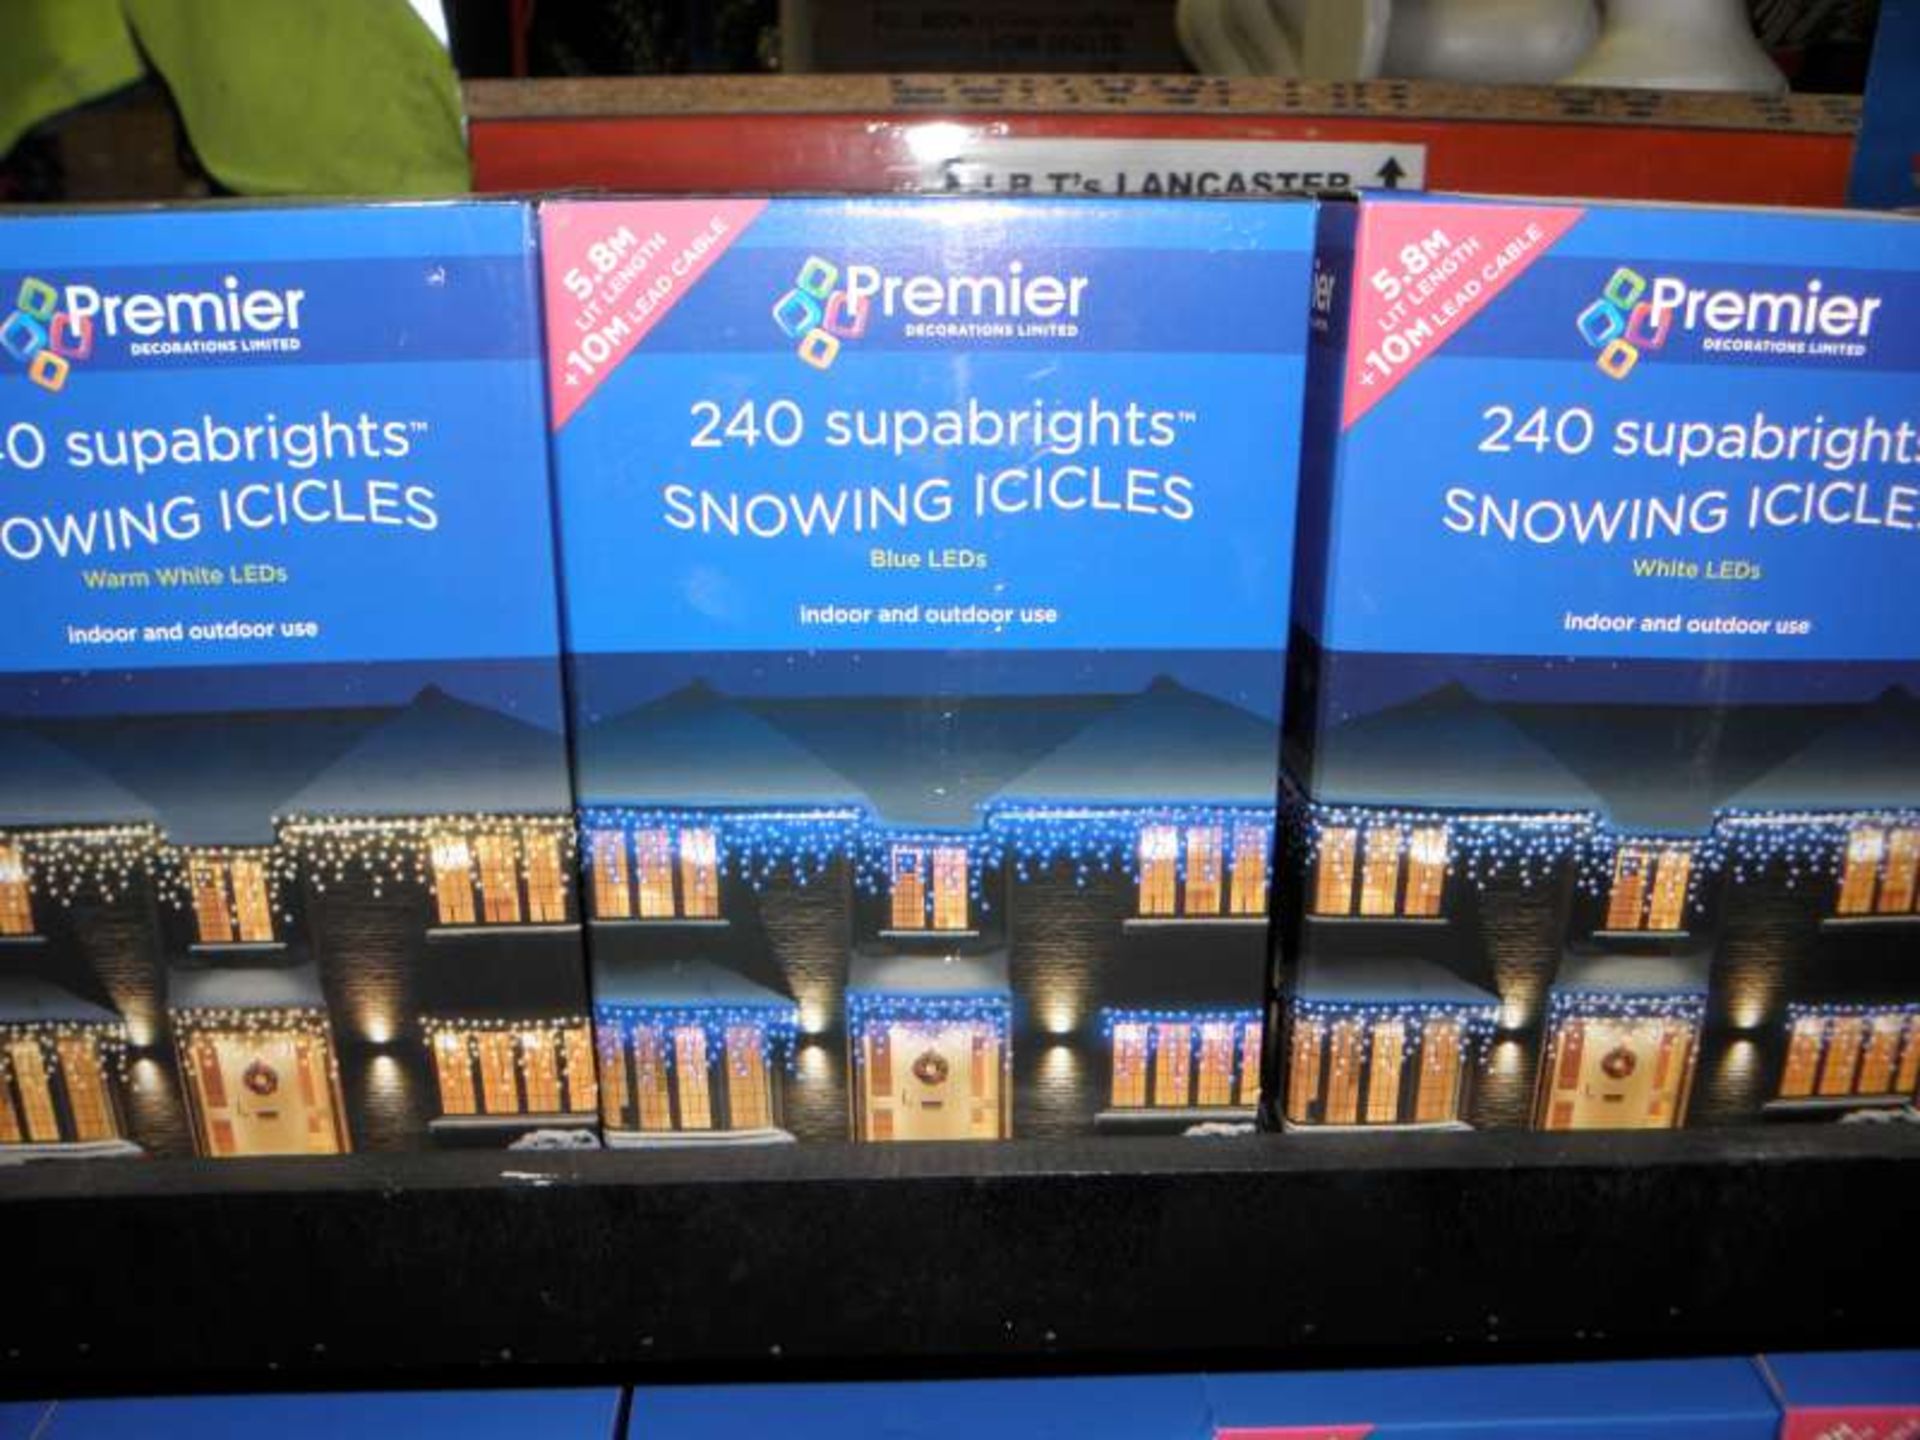 25 X PREMIER 240 SUPABRIGHTS SNOWING ICICLES WHITE LED LIGHTS